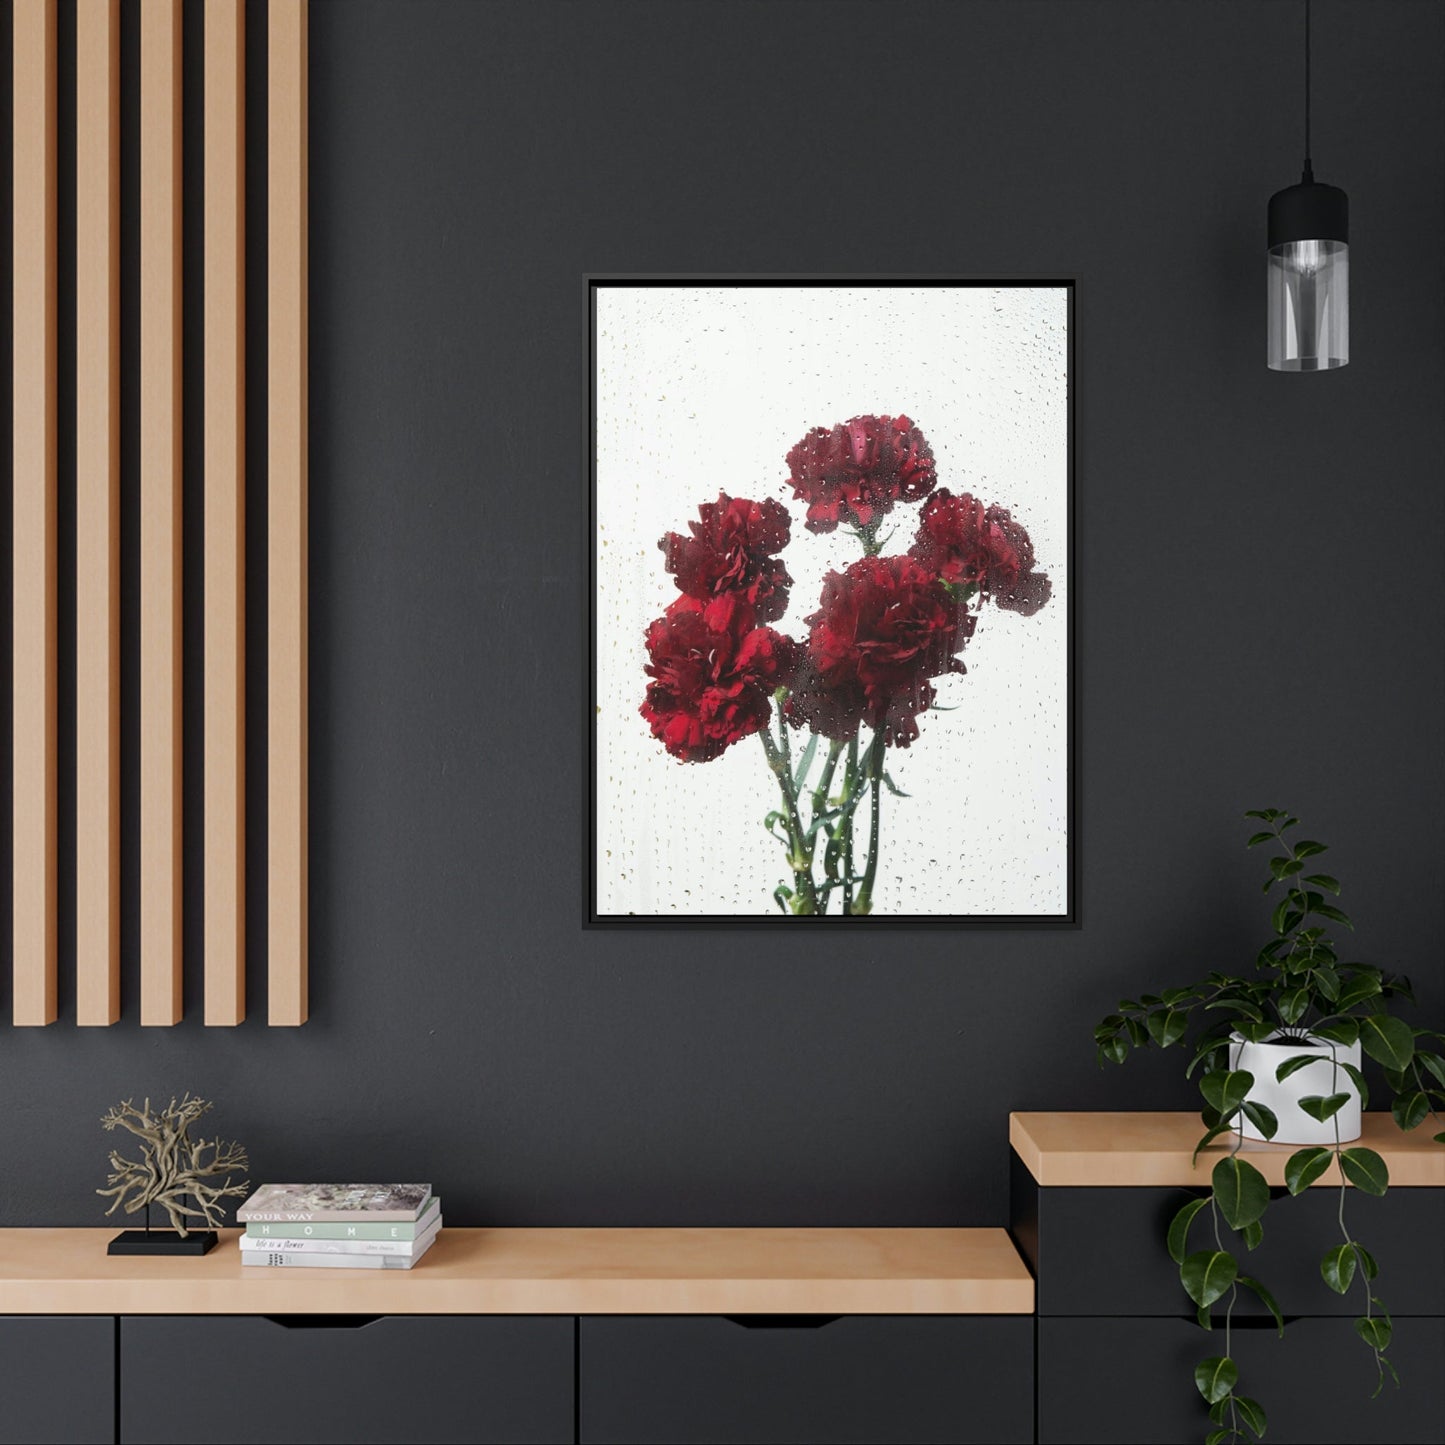 Timeless Charm: Carnations Art on Natural Canvas and Wall Art Prints for Your Home Decor